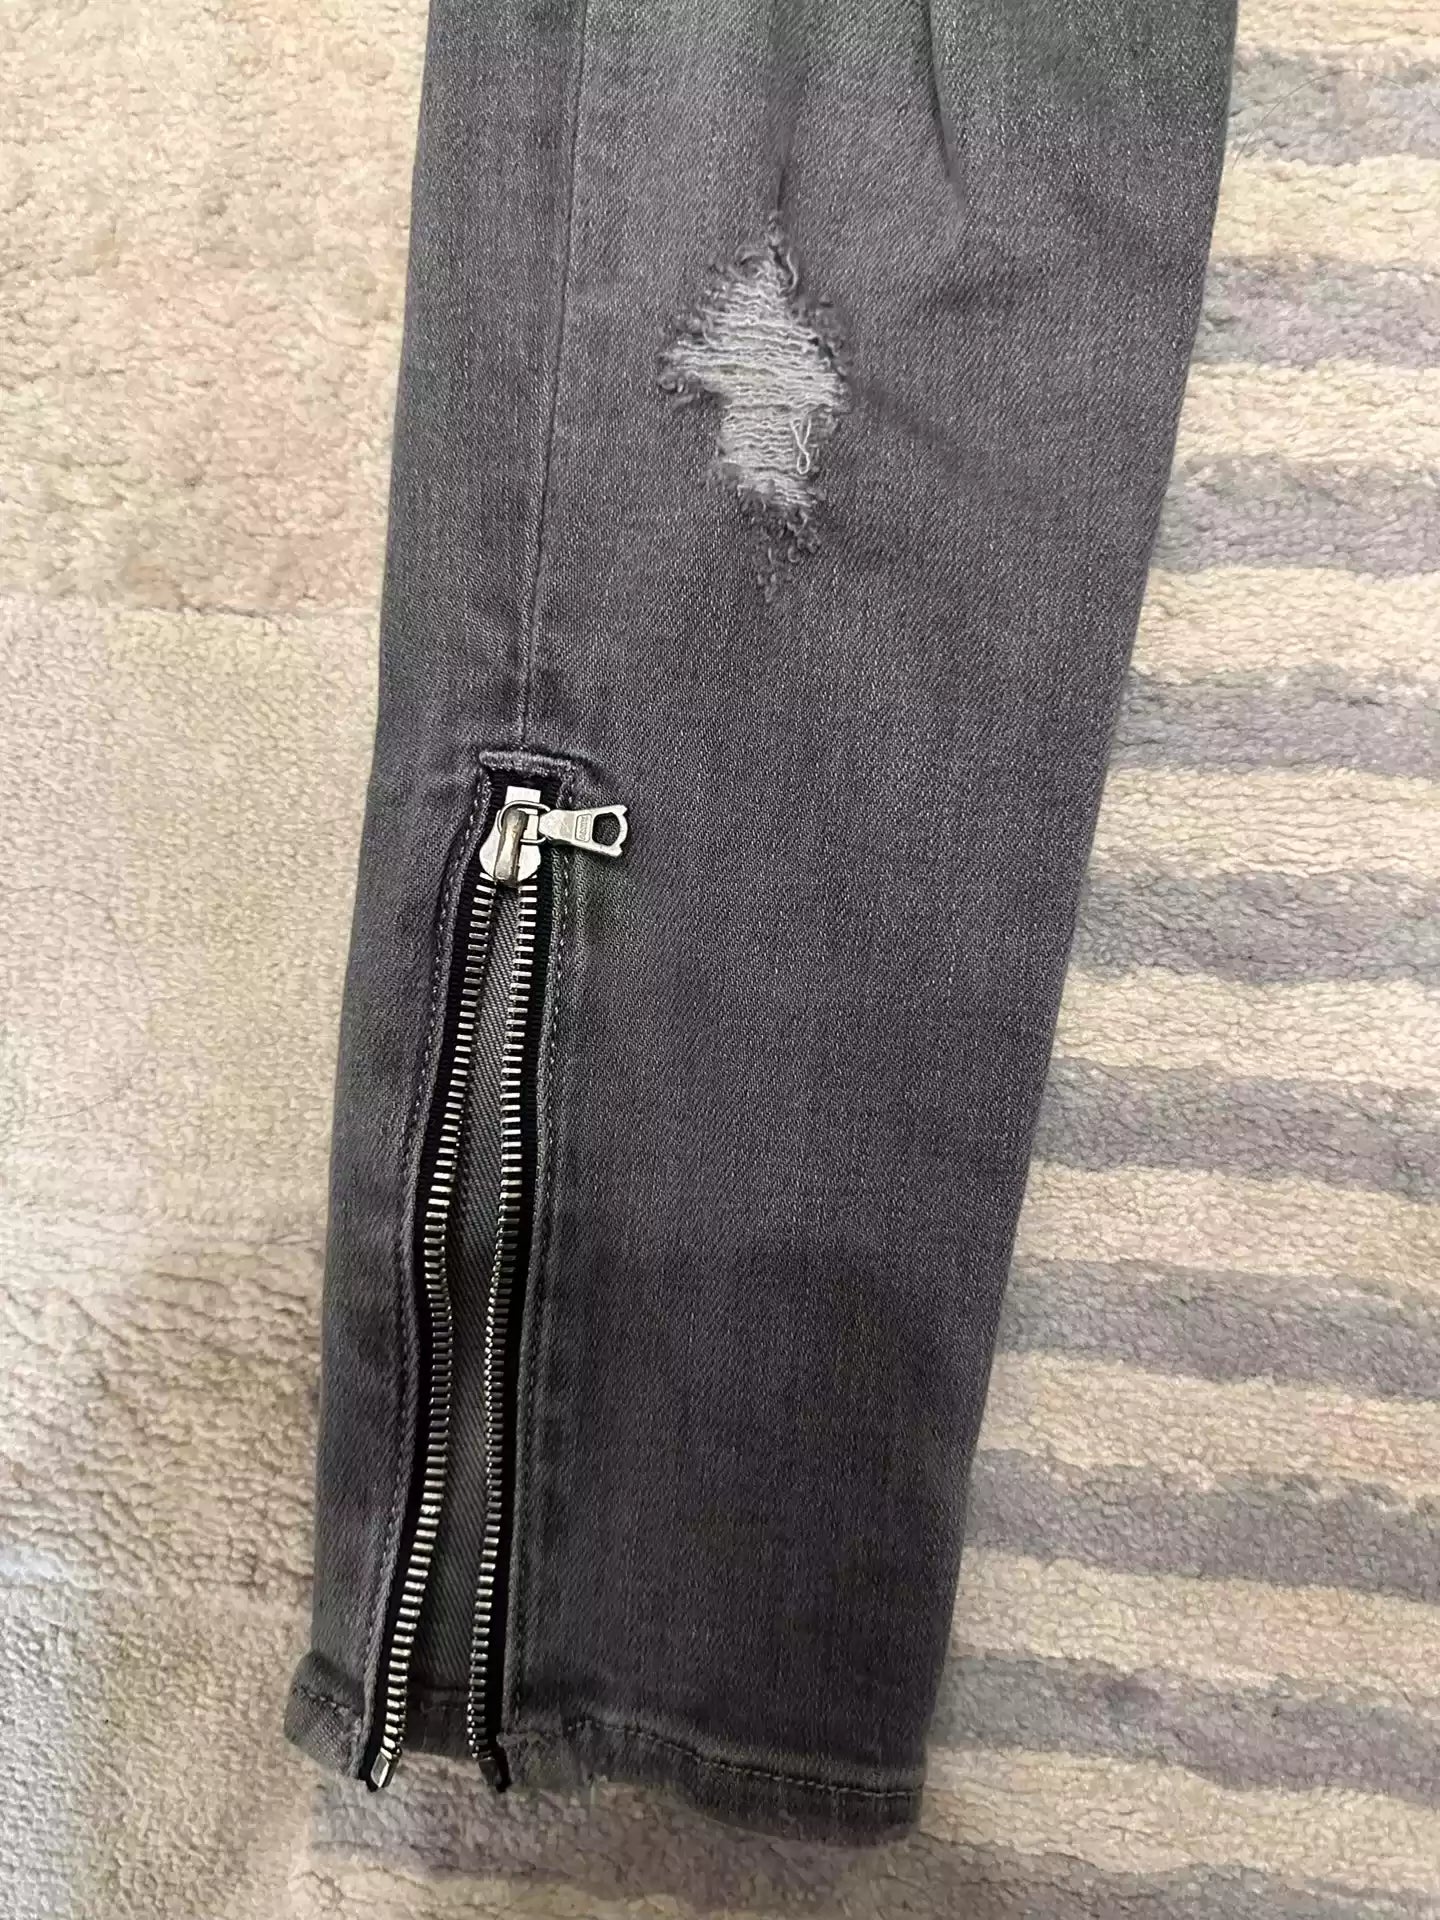 Amiri jeans with holes in the side zipper